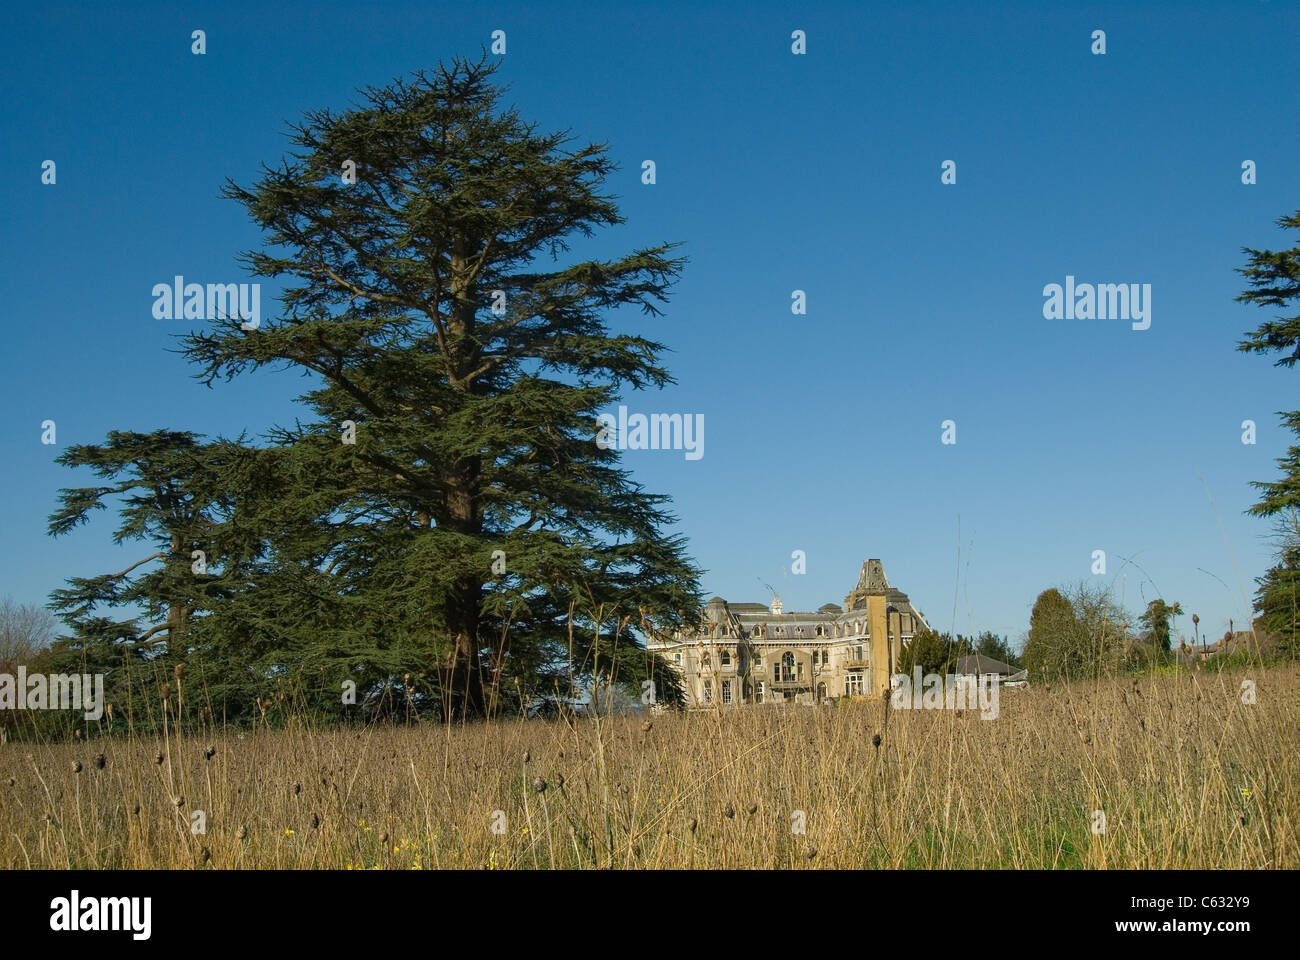 Park Place at Remenham near Henley in Berkshire, UK with giant cedar trees blue sky and grassland in front of the house Stock Photo